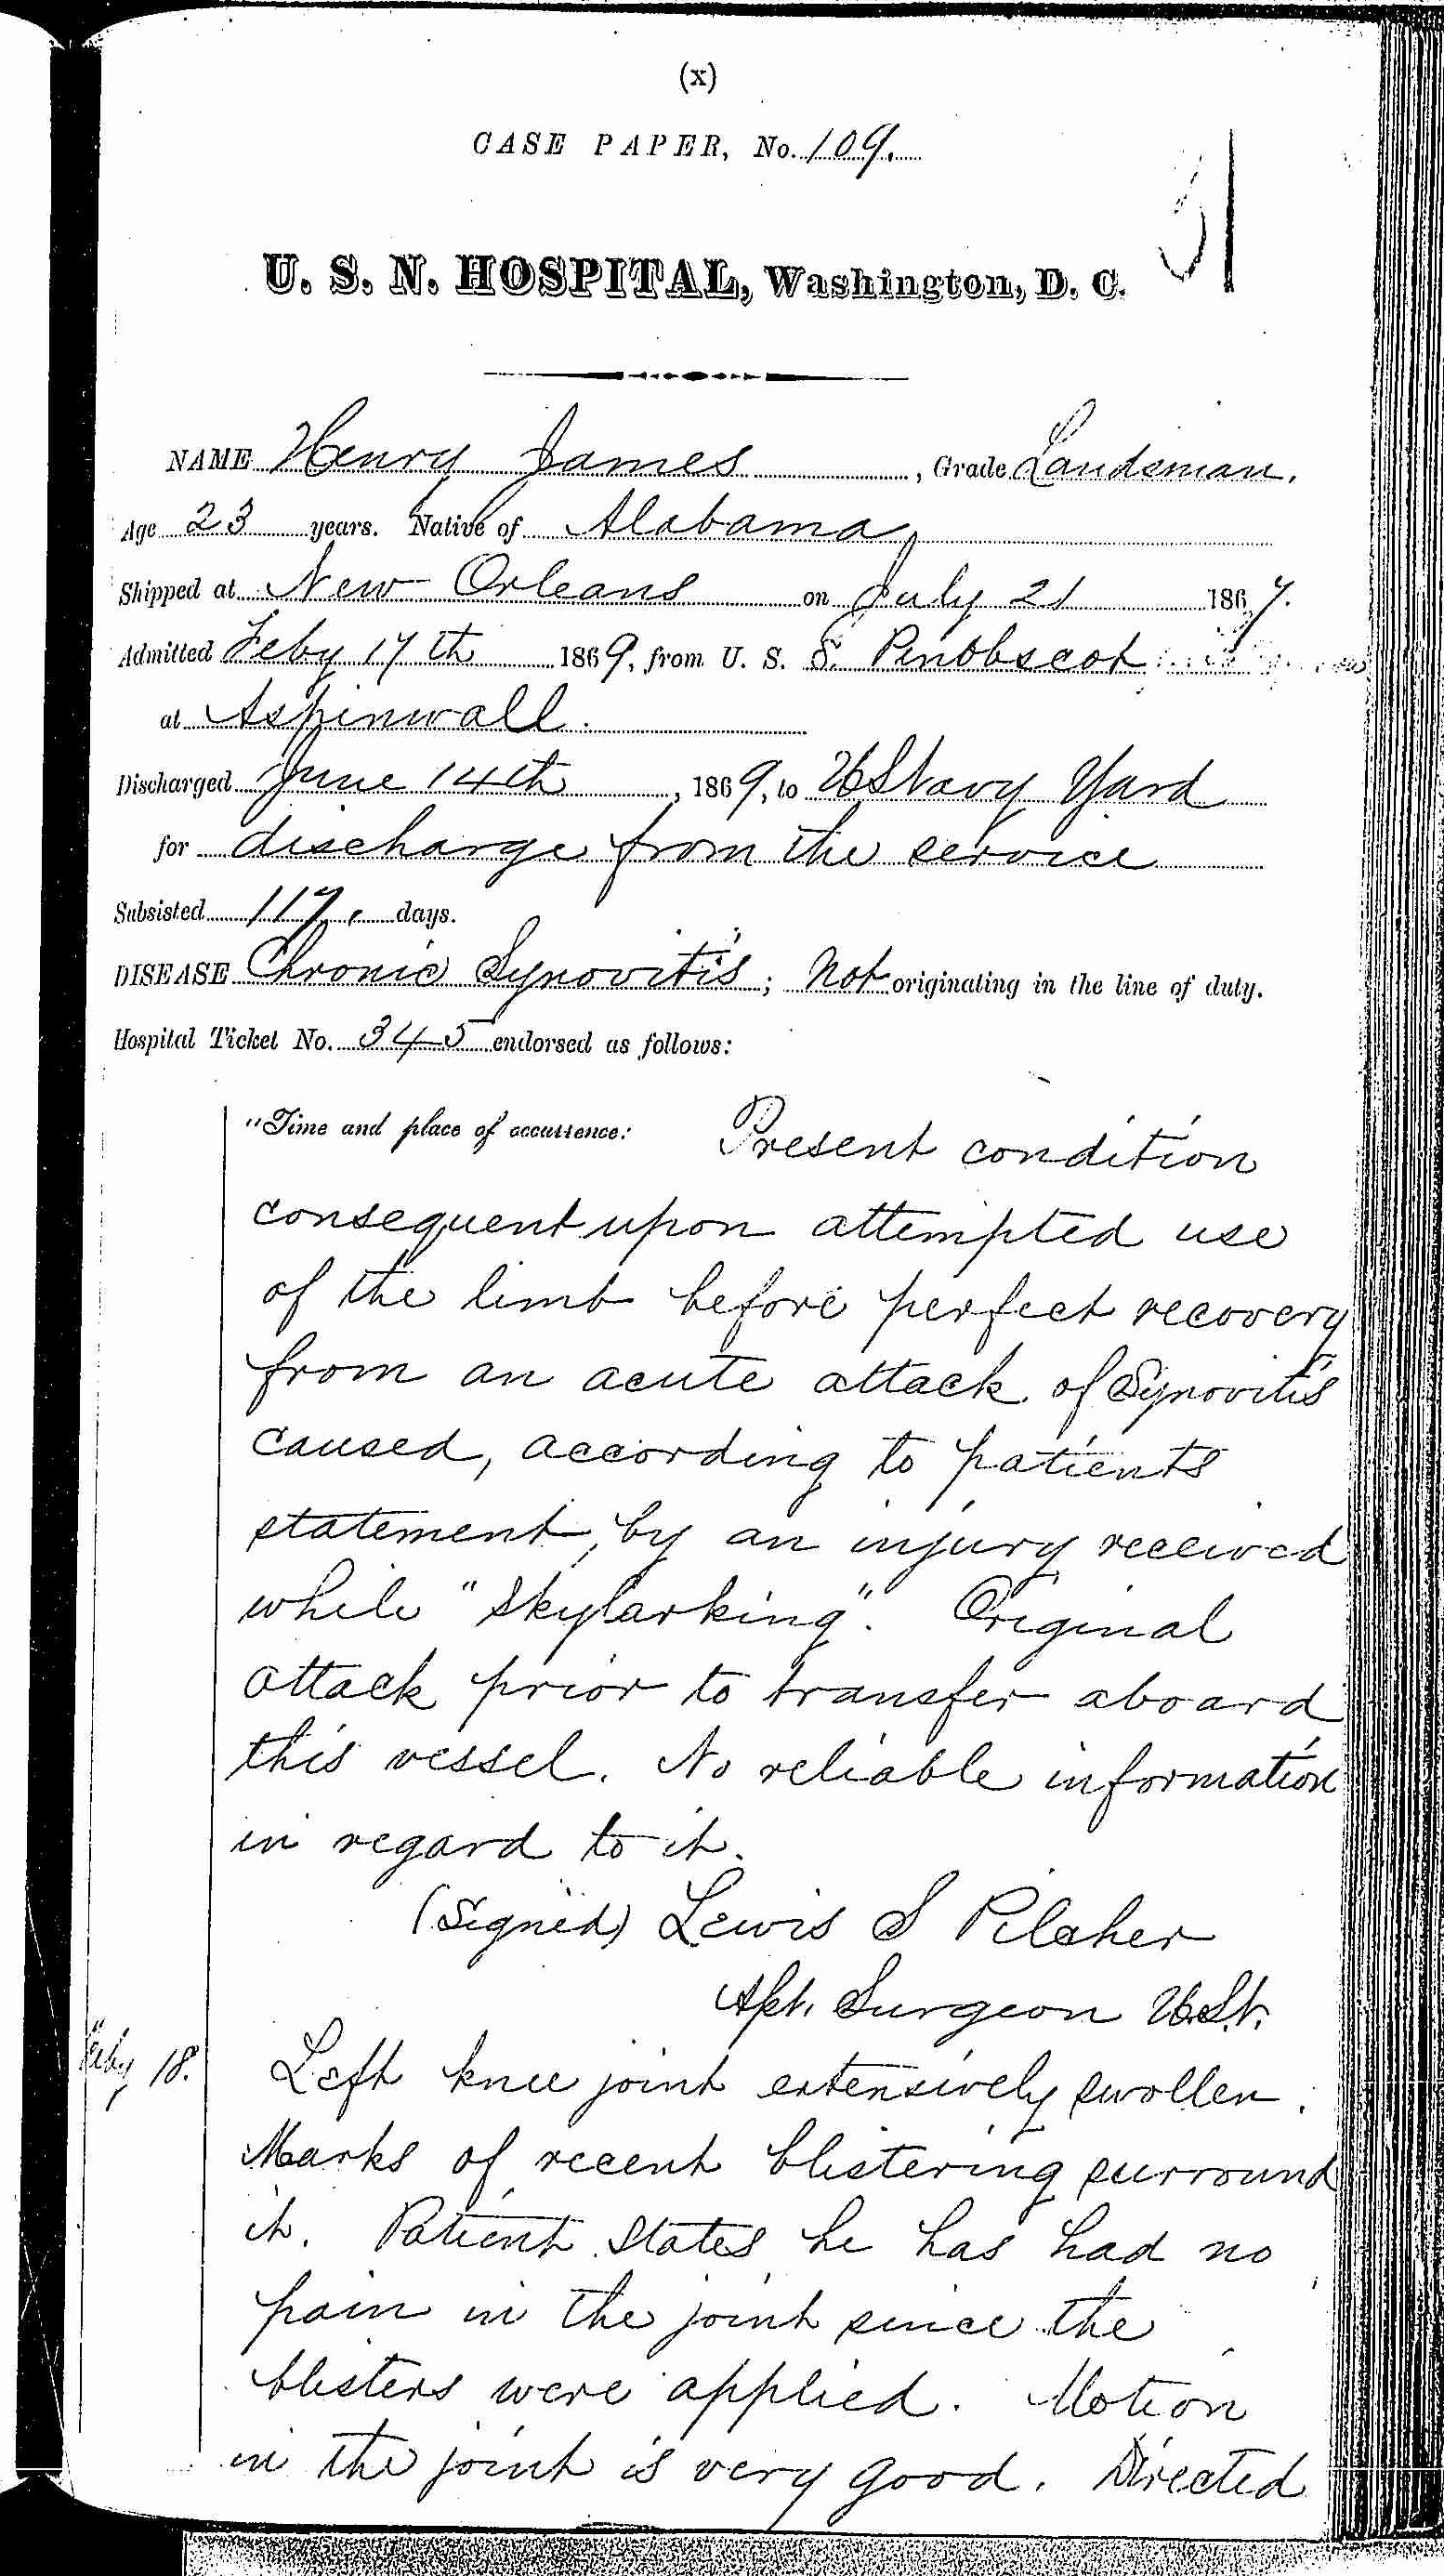 Entry for Henry James (page 1 of 8) in the log Hospital Tickets and Case Papers - Naval Hospital - Washington, D.C. - 1868-69